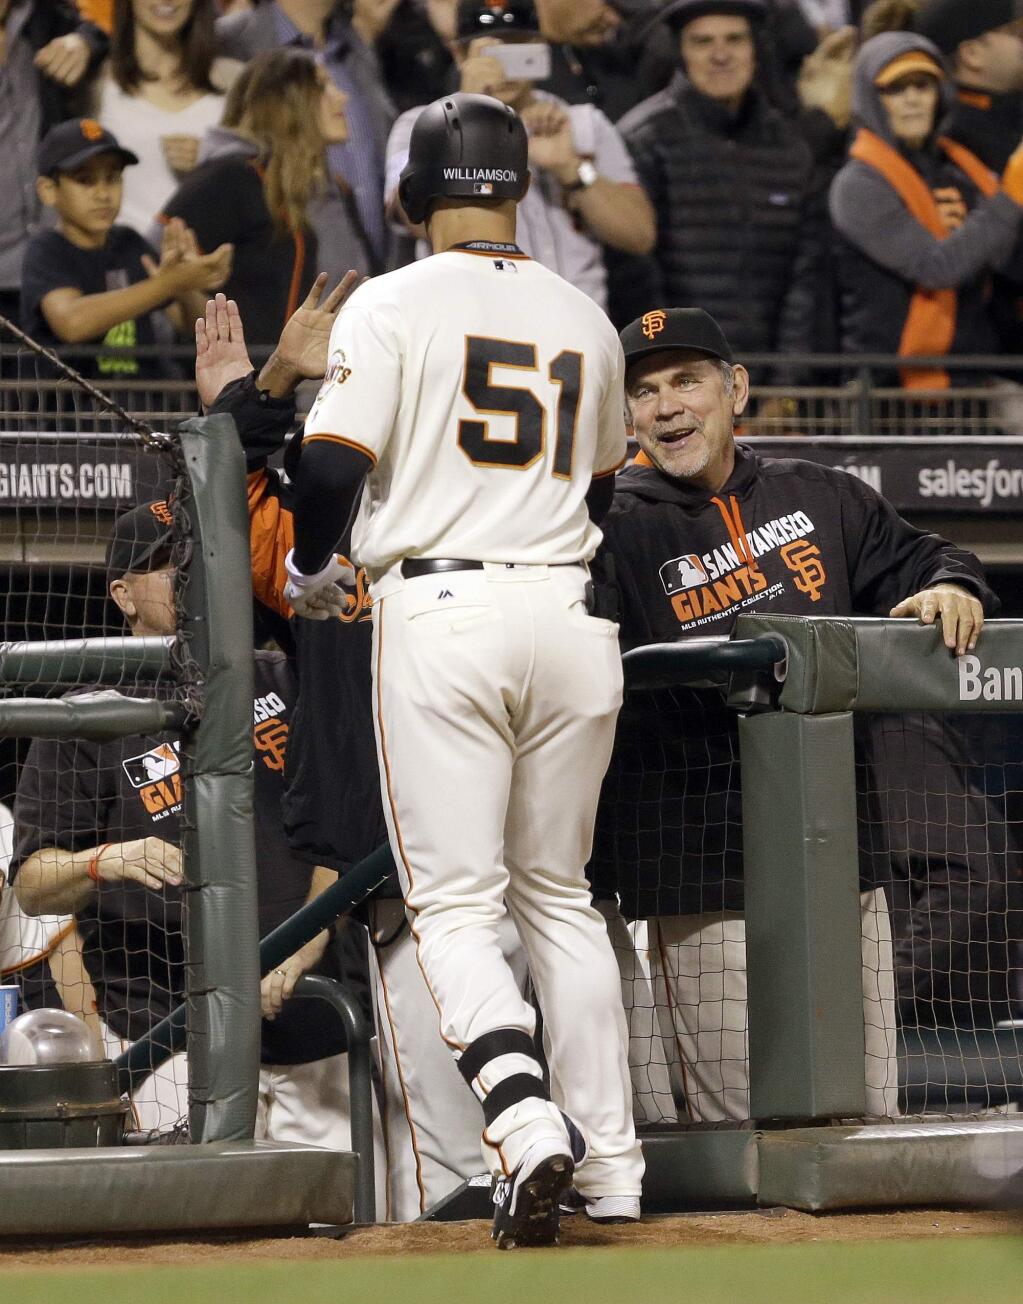 San Francisco Giants manager Bruce Bochy, right, smiles at Mac Williamson (51) after Williamson hit a home run against the Boston Red Sox during the eighth inning of a baseball game Wednesday, June 8, 2016, in San Francisco. (AP Photo/Ben Margot)